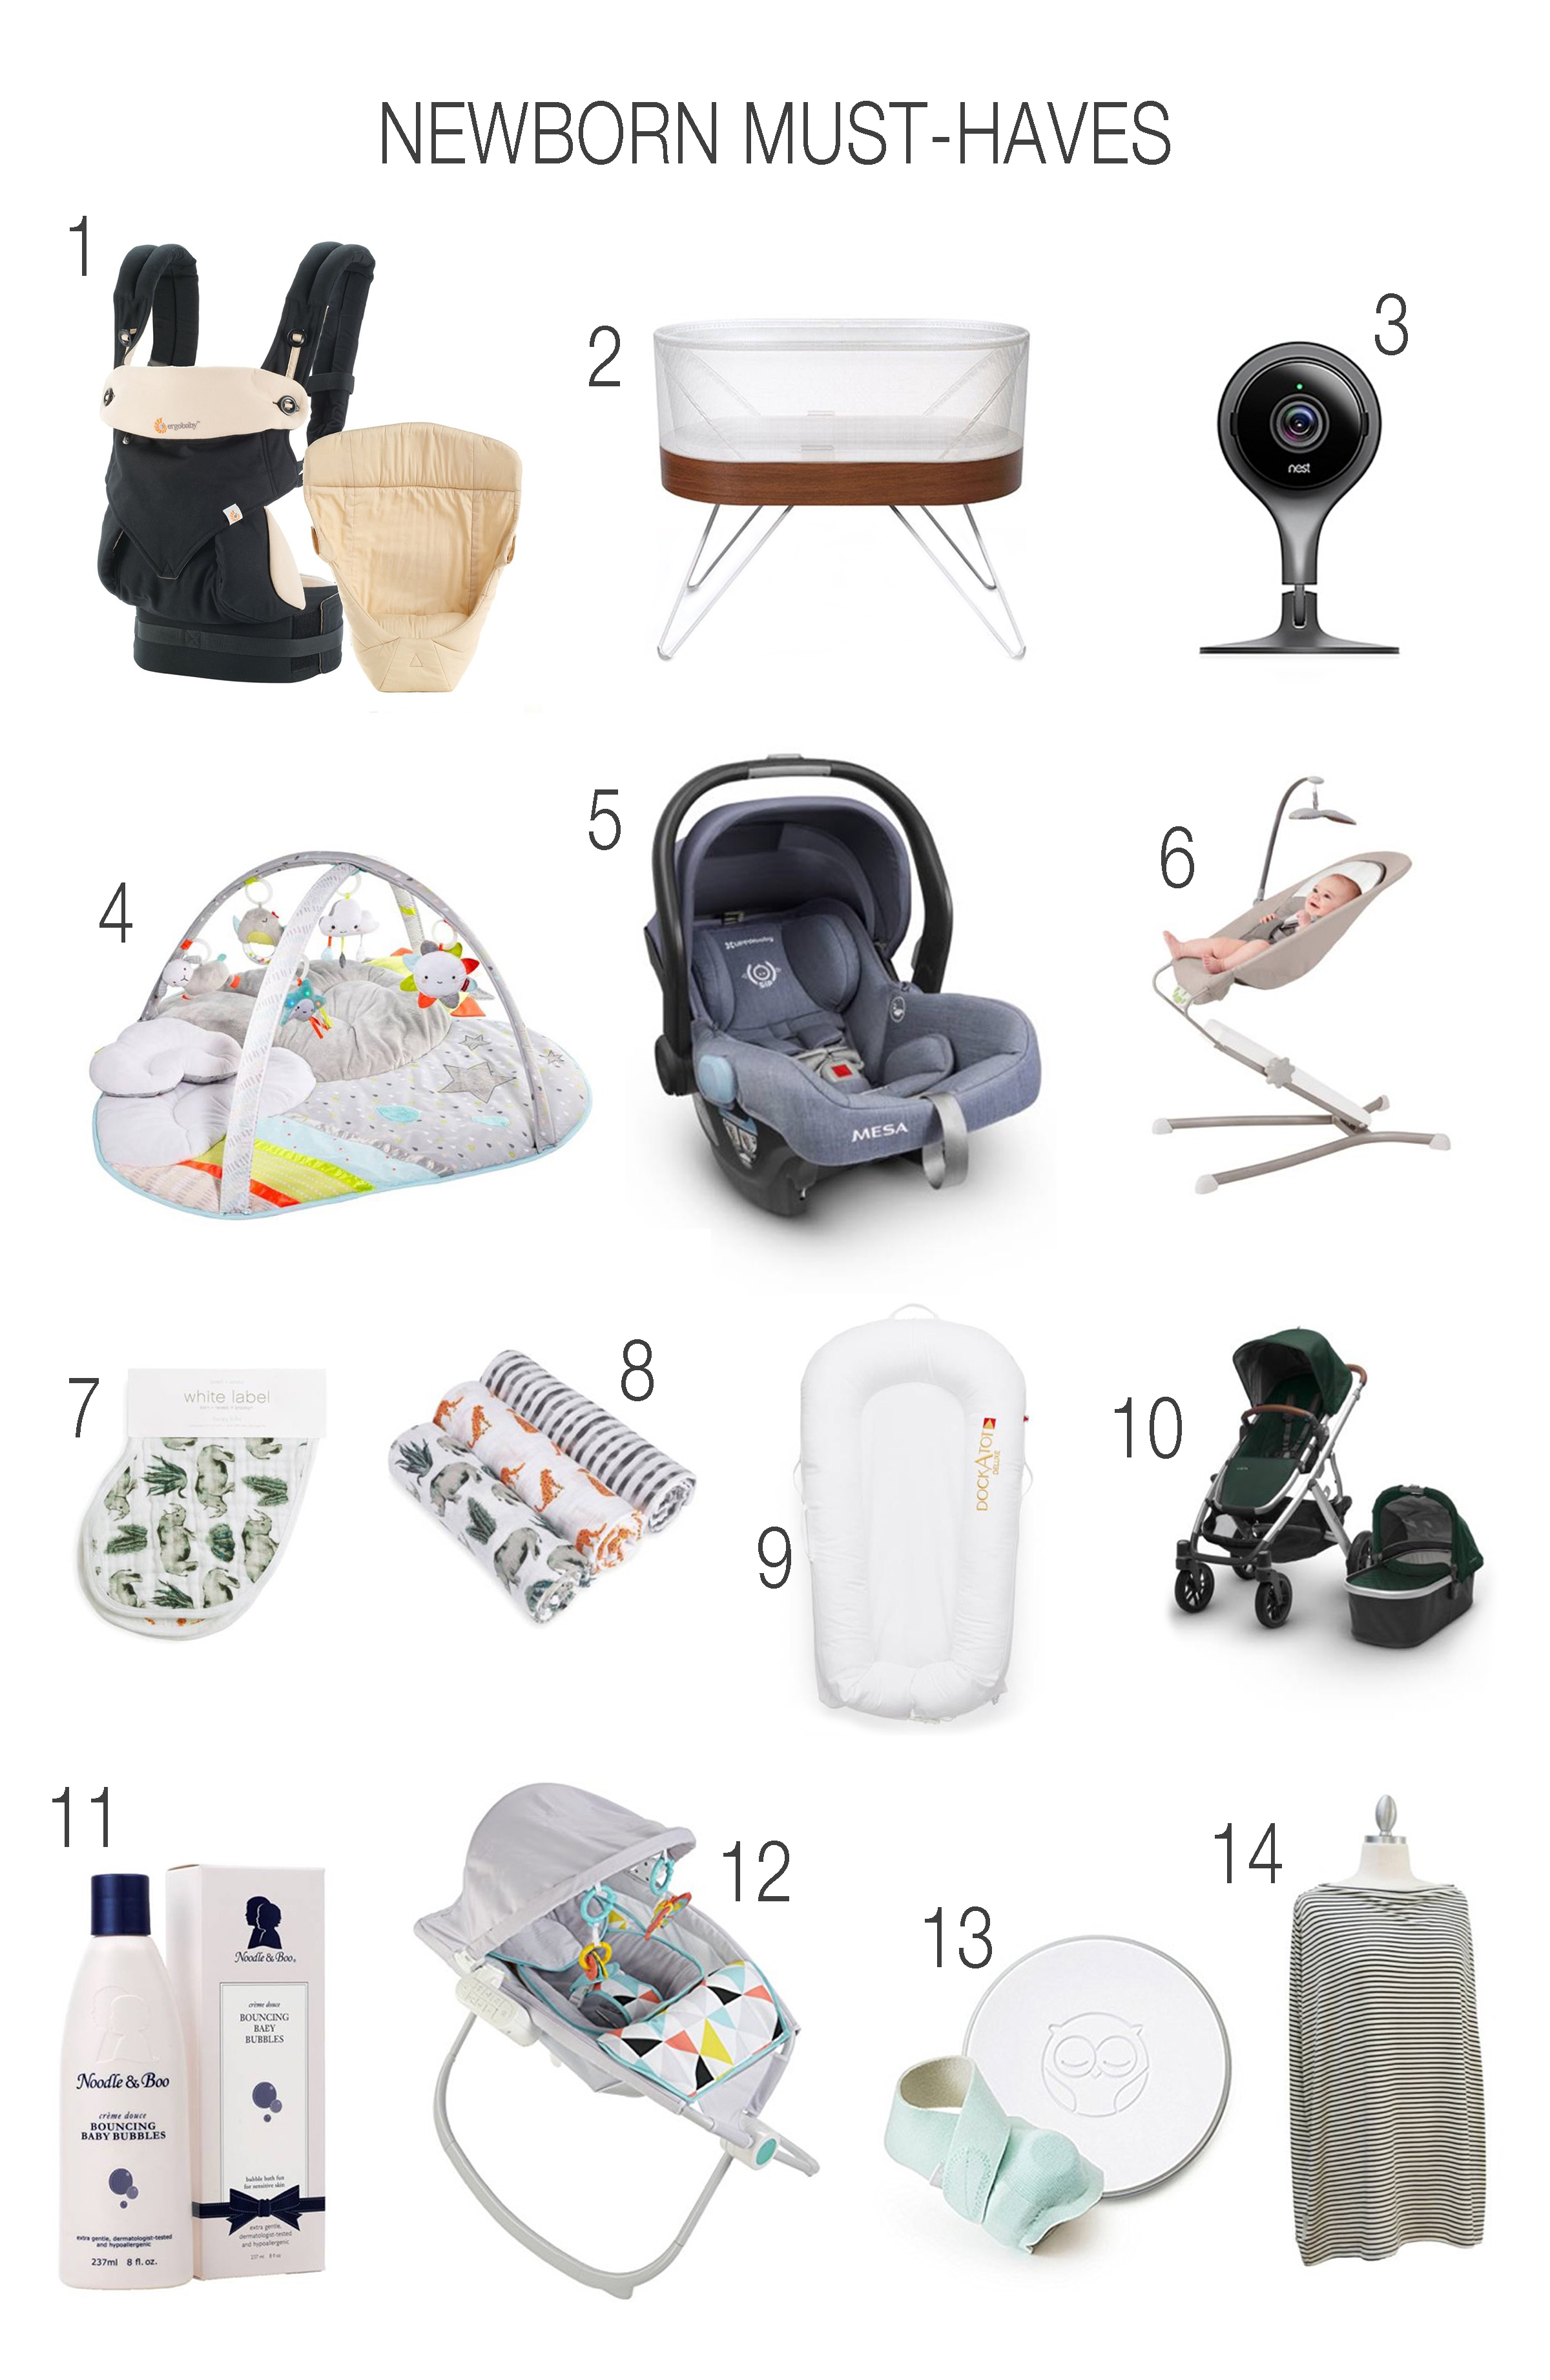 14 Newborn Must Haves by Las Vegas mom bloggers Life of a Sister